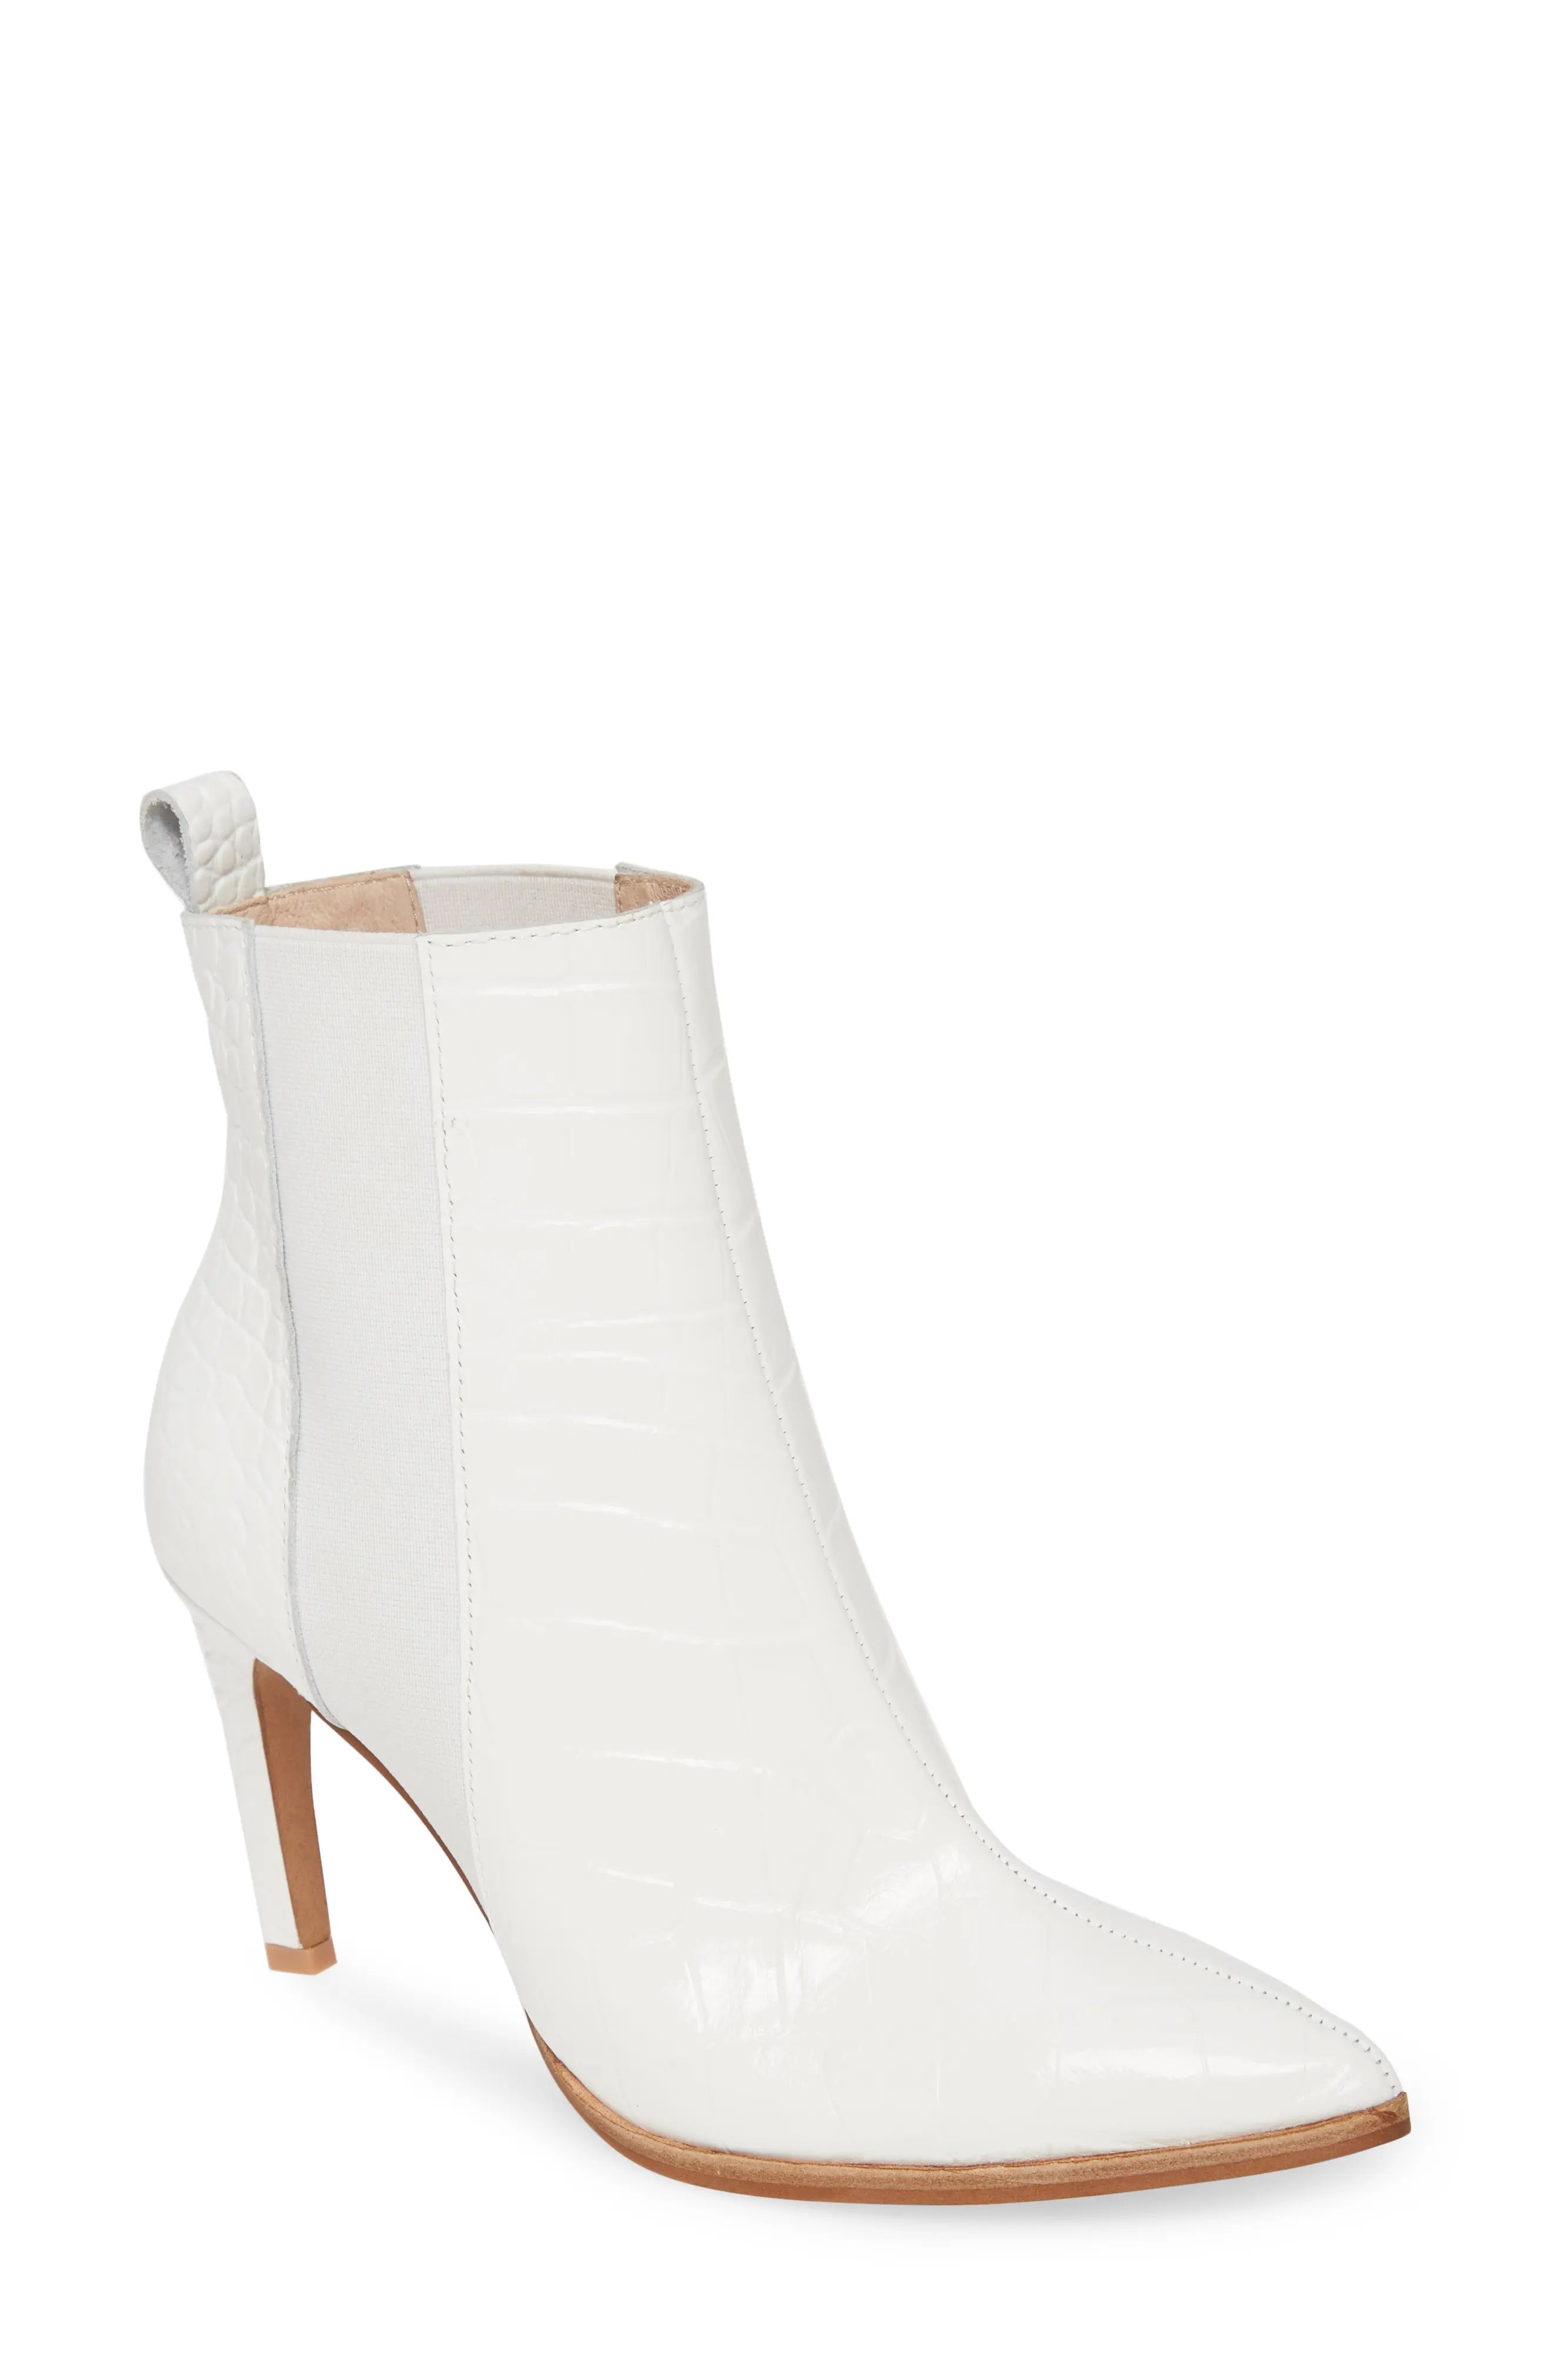 42 Gold Kensington Chelsea Boot, Size 5 in White Leather at Nordstrom | Nordstrom